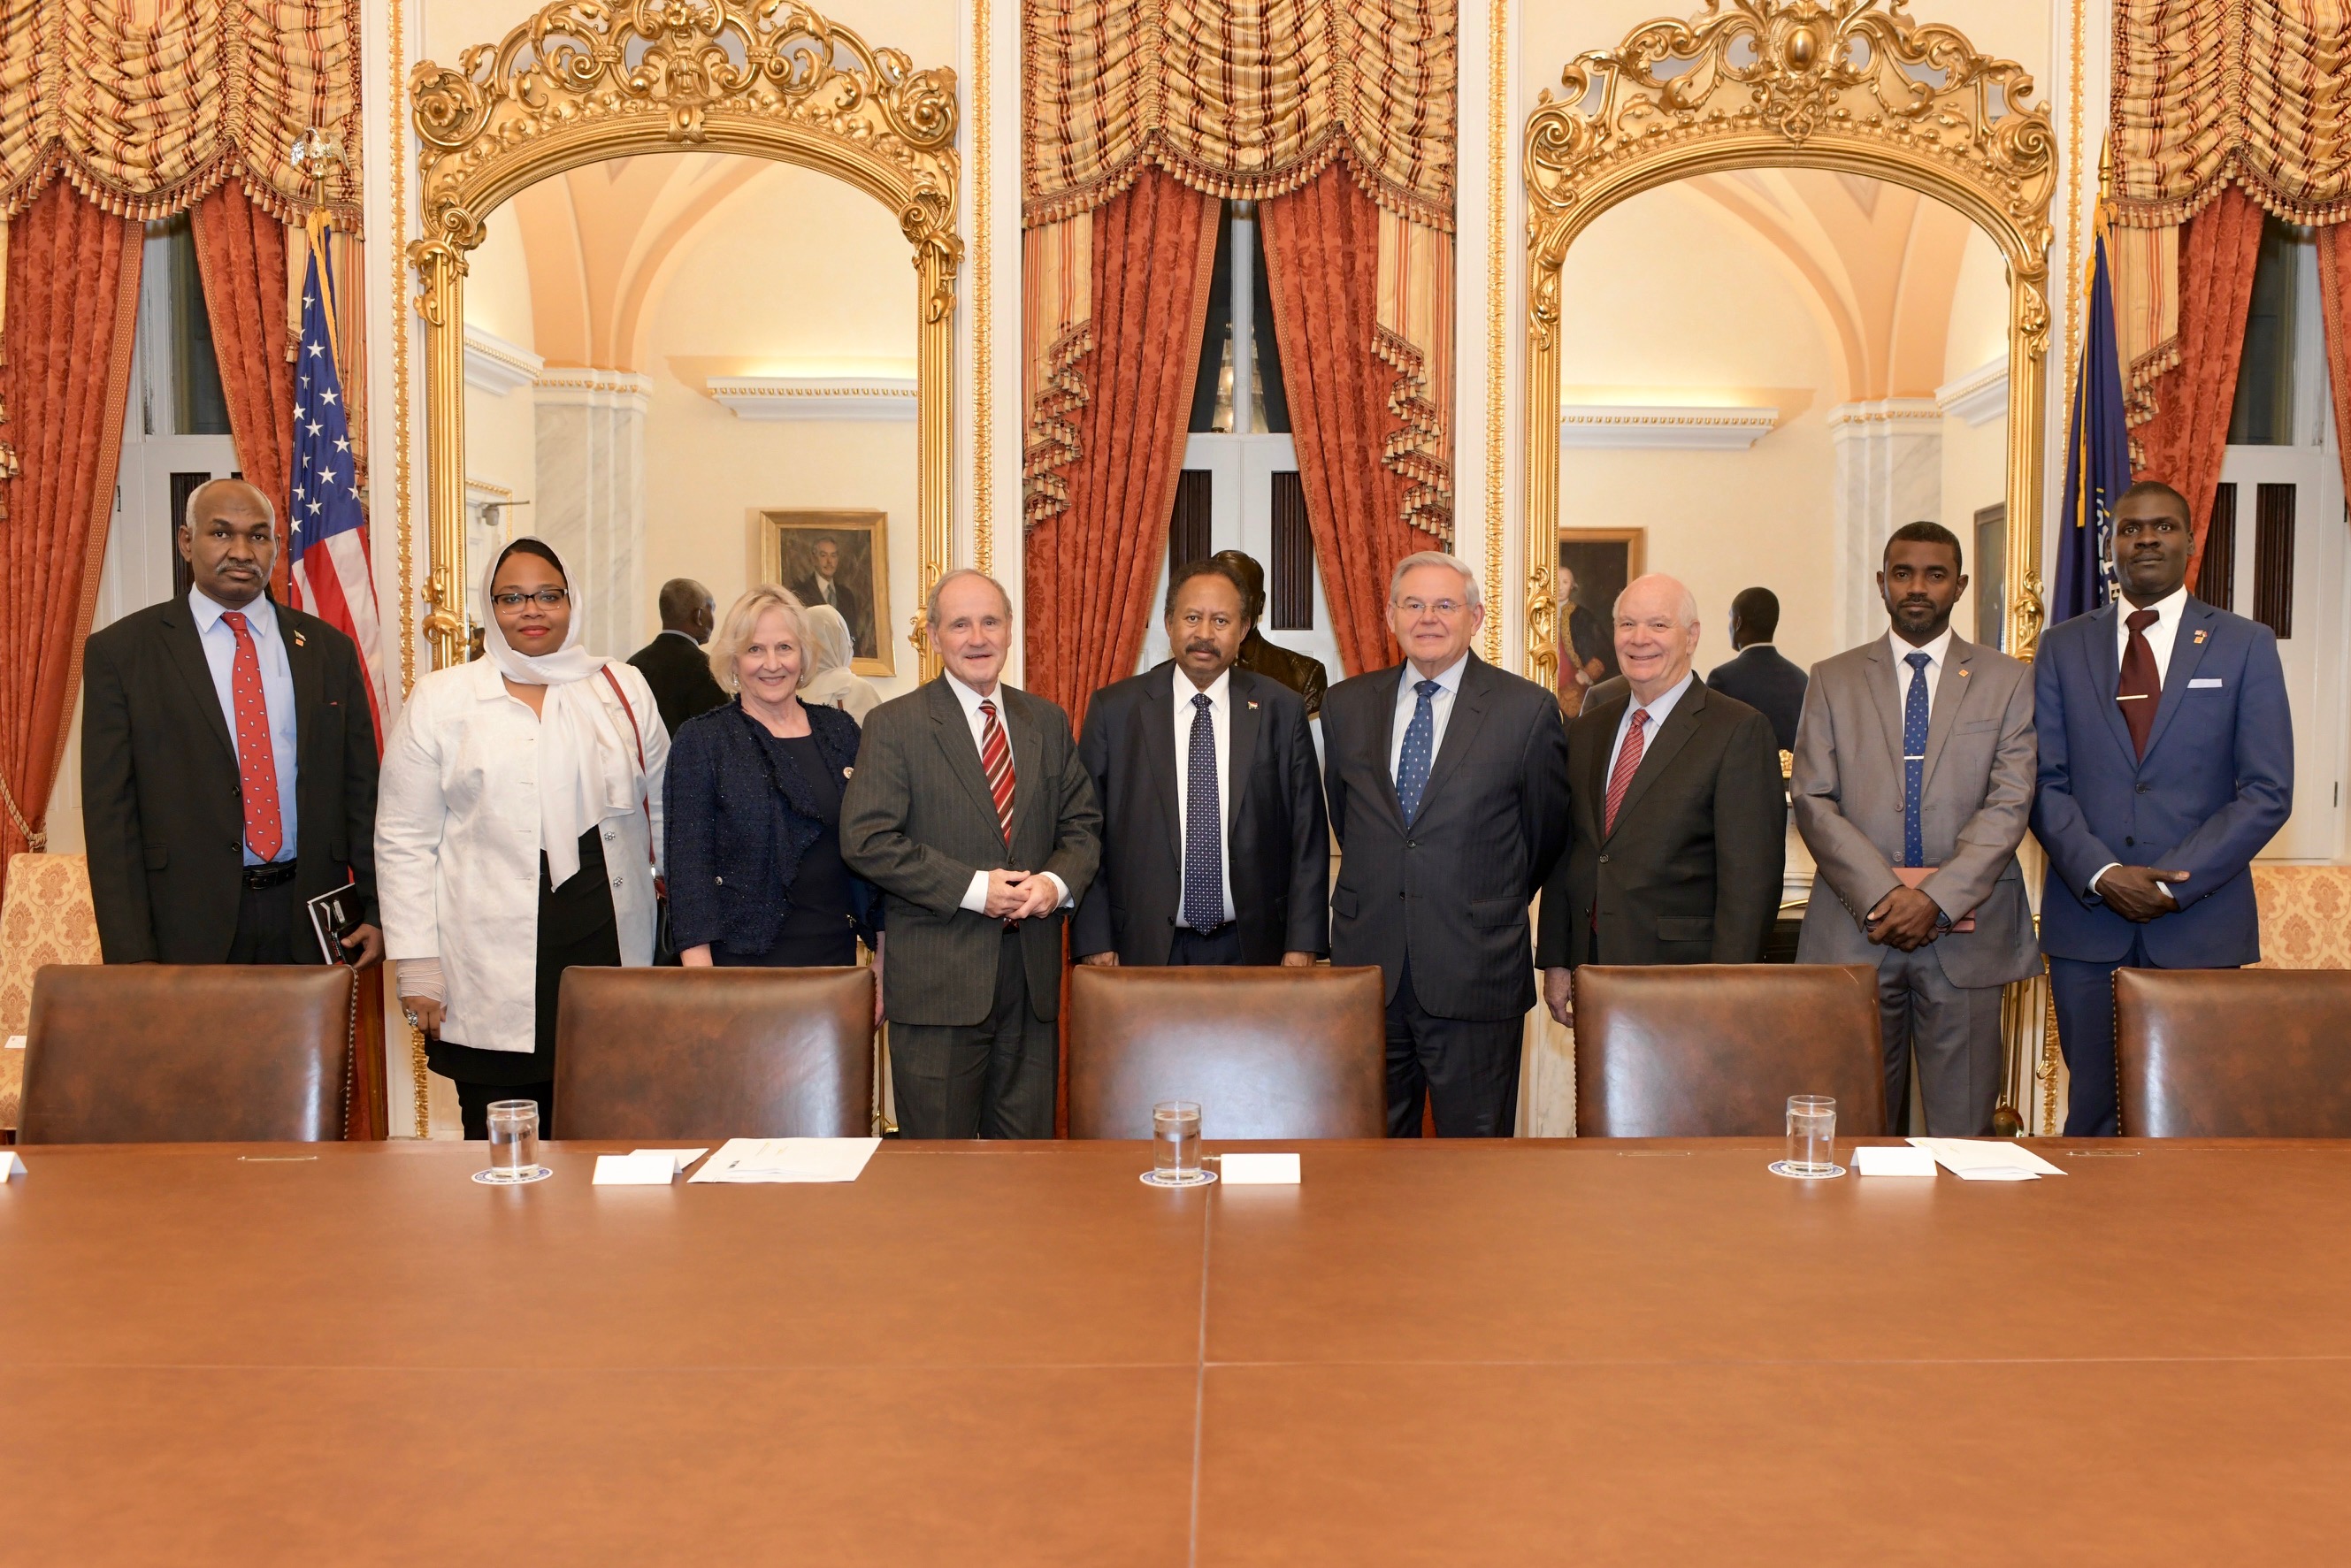 risch with committee and sudanese ministers group